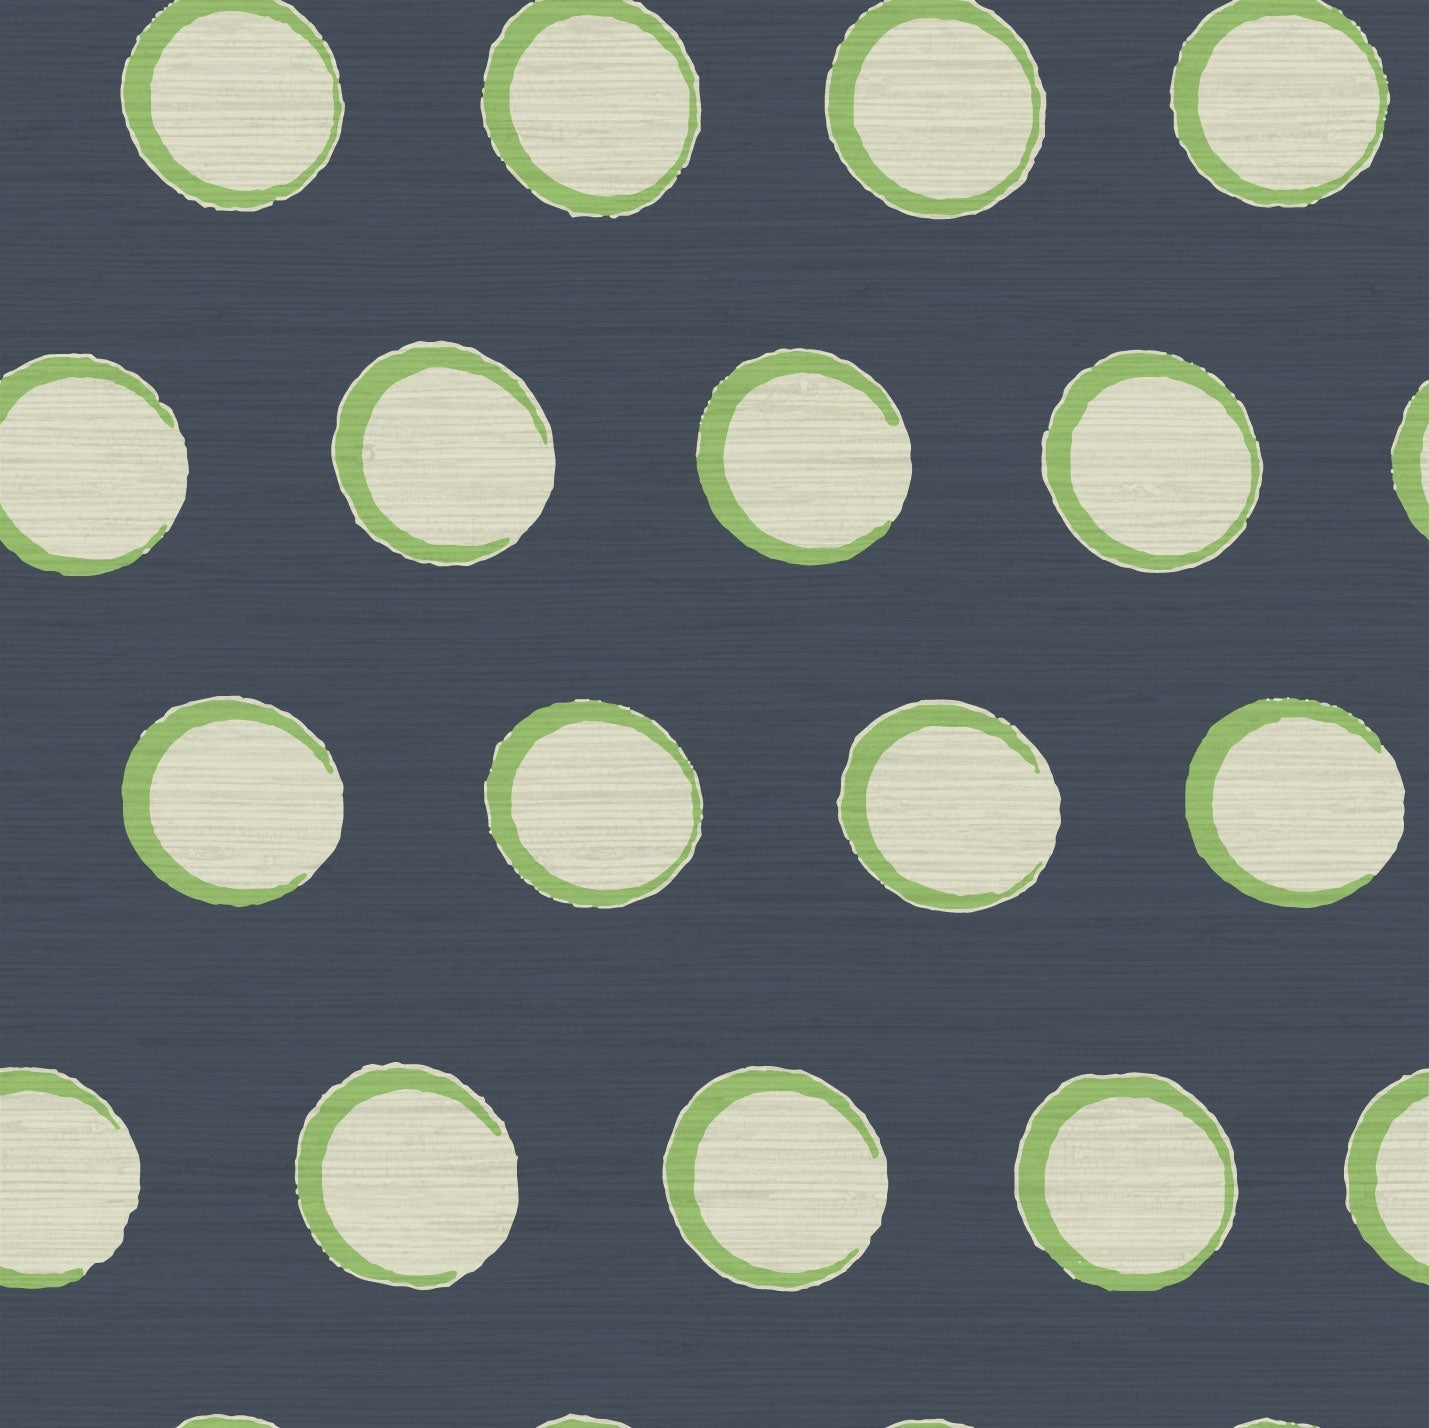 grasscloth printed wallpaper in navy blue printed base color with oversized cream dots with pea green outline laid out in a geometric pattern